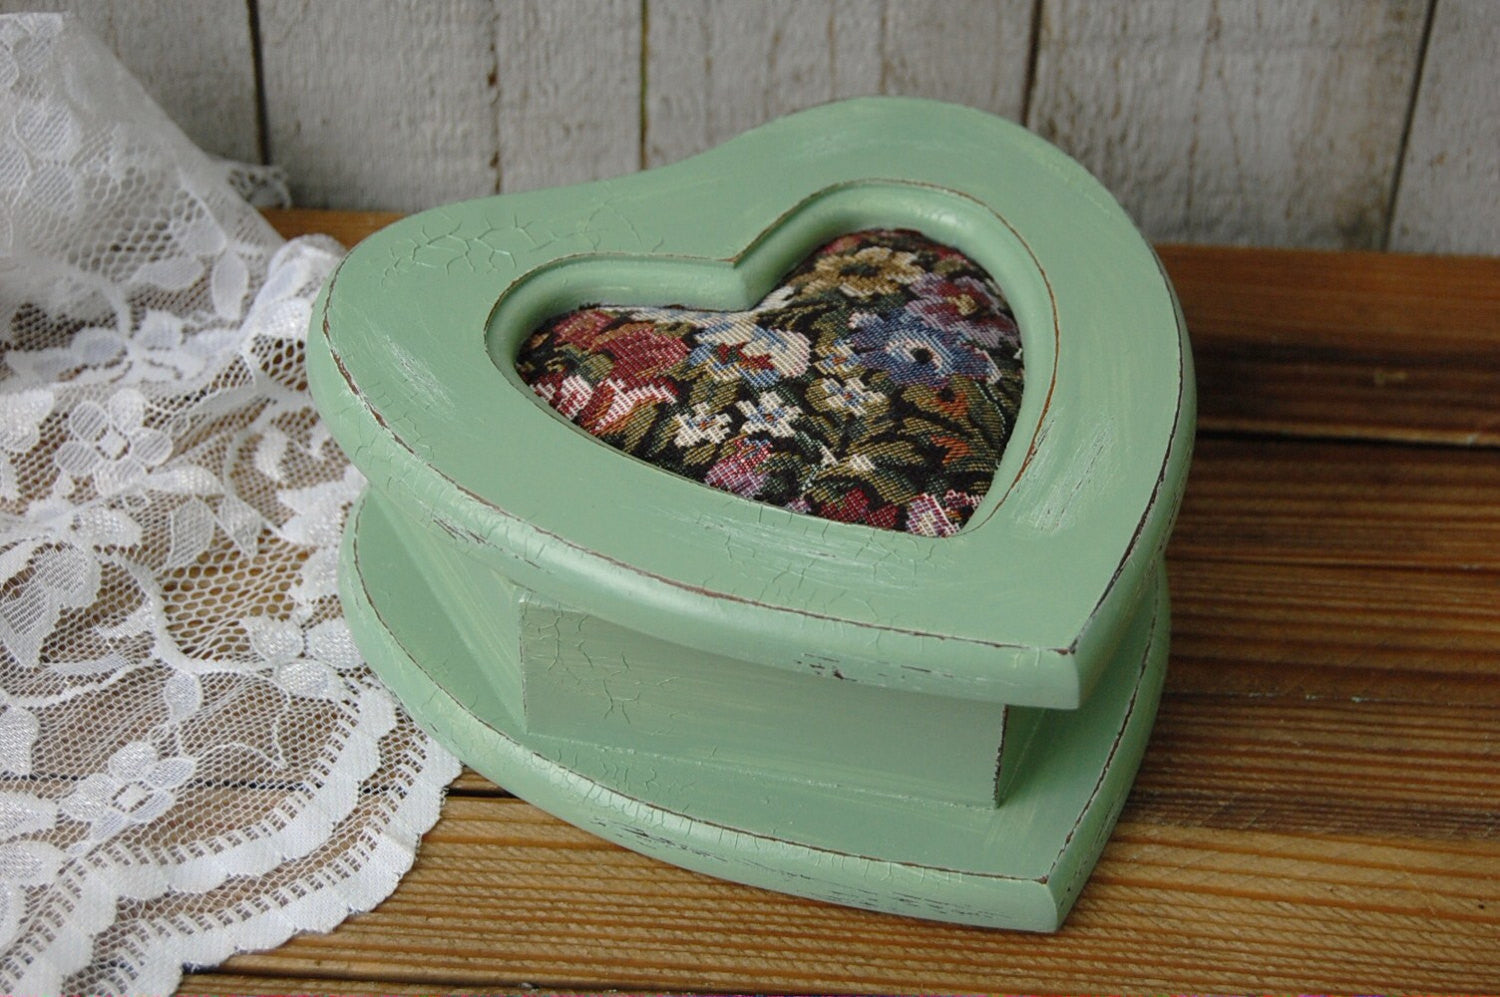 Heart shaped tapestry jewelry box - The Vintage Artistry